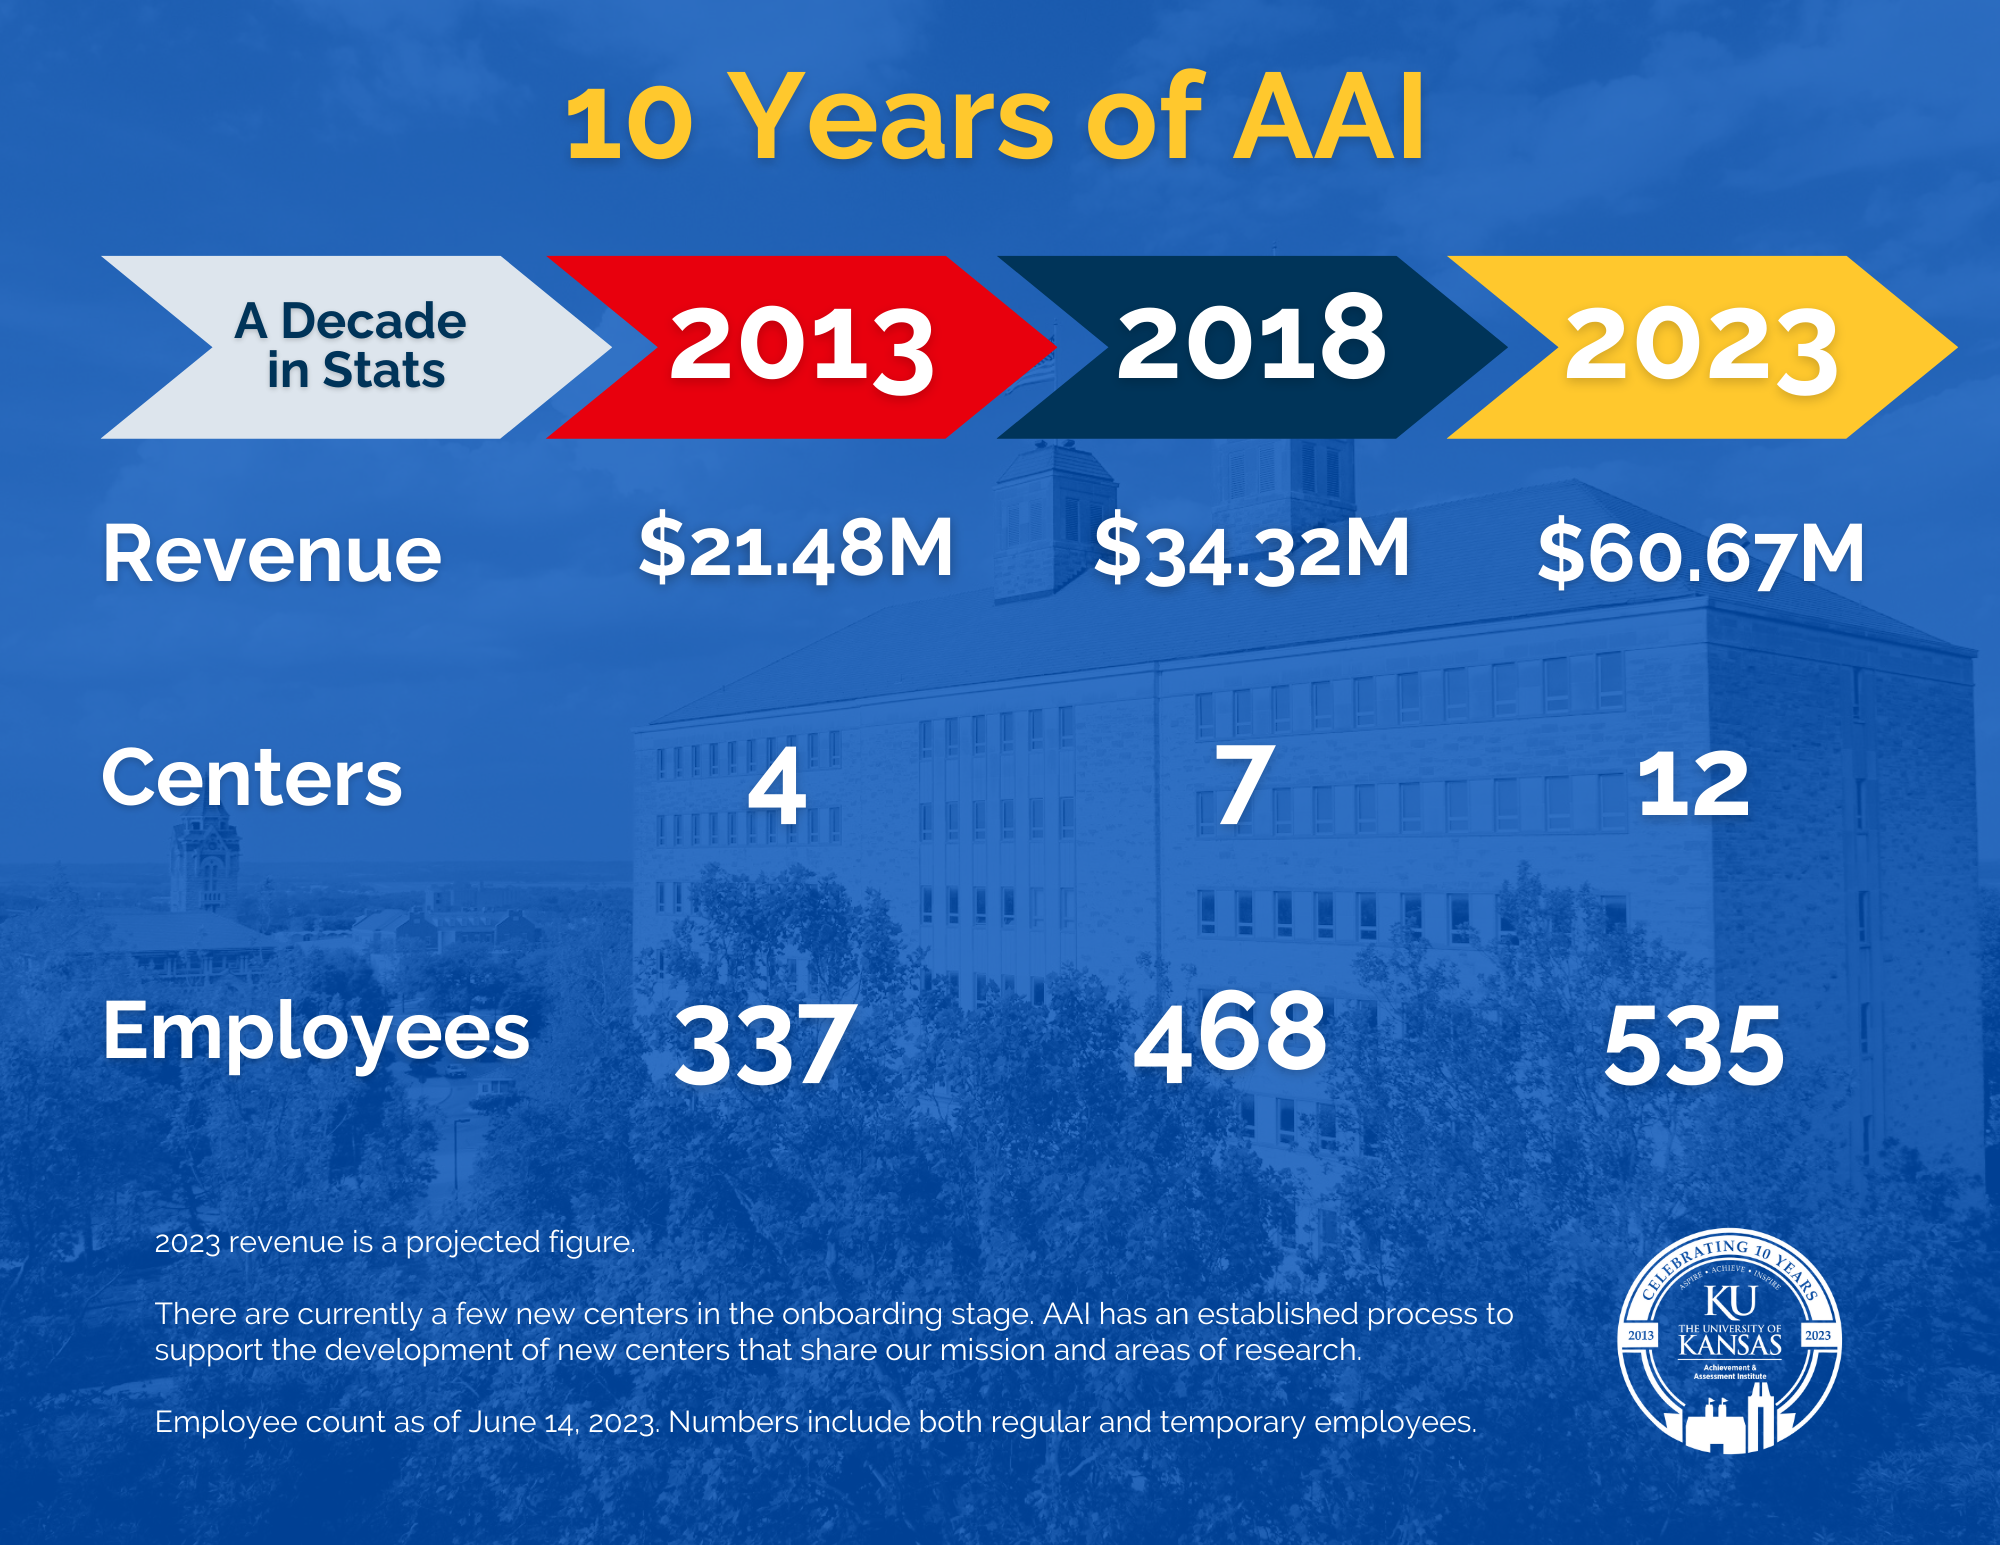 A graphic charting specific stats of the Achievement & Assessment Institute. 10 Years of AAI, A Decade in Stats, Revenue (2013) $214. M, (2018) $34.32 M, 2023 $60.67 M. Centers, (2013) 3, (2018) 7, 2023 (12), Employees (2013), 337, (2018) 468, (2023) 535. 2023 revenue is a projected figure. There are currently a few new centers in the works. AAI has an established process to support the development of new centers that share our mission areas of research. Employee count as Jun 14, 2023.